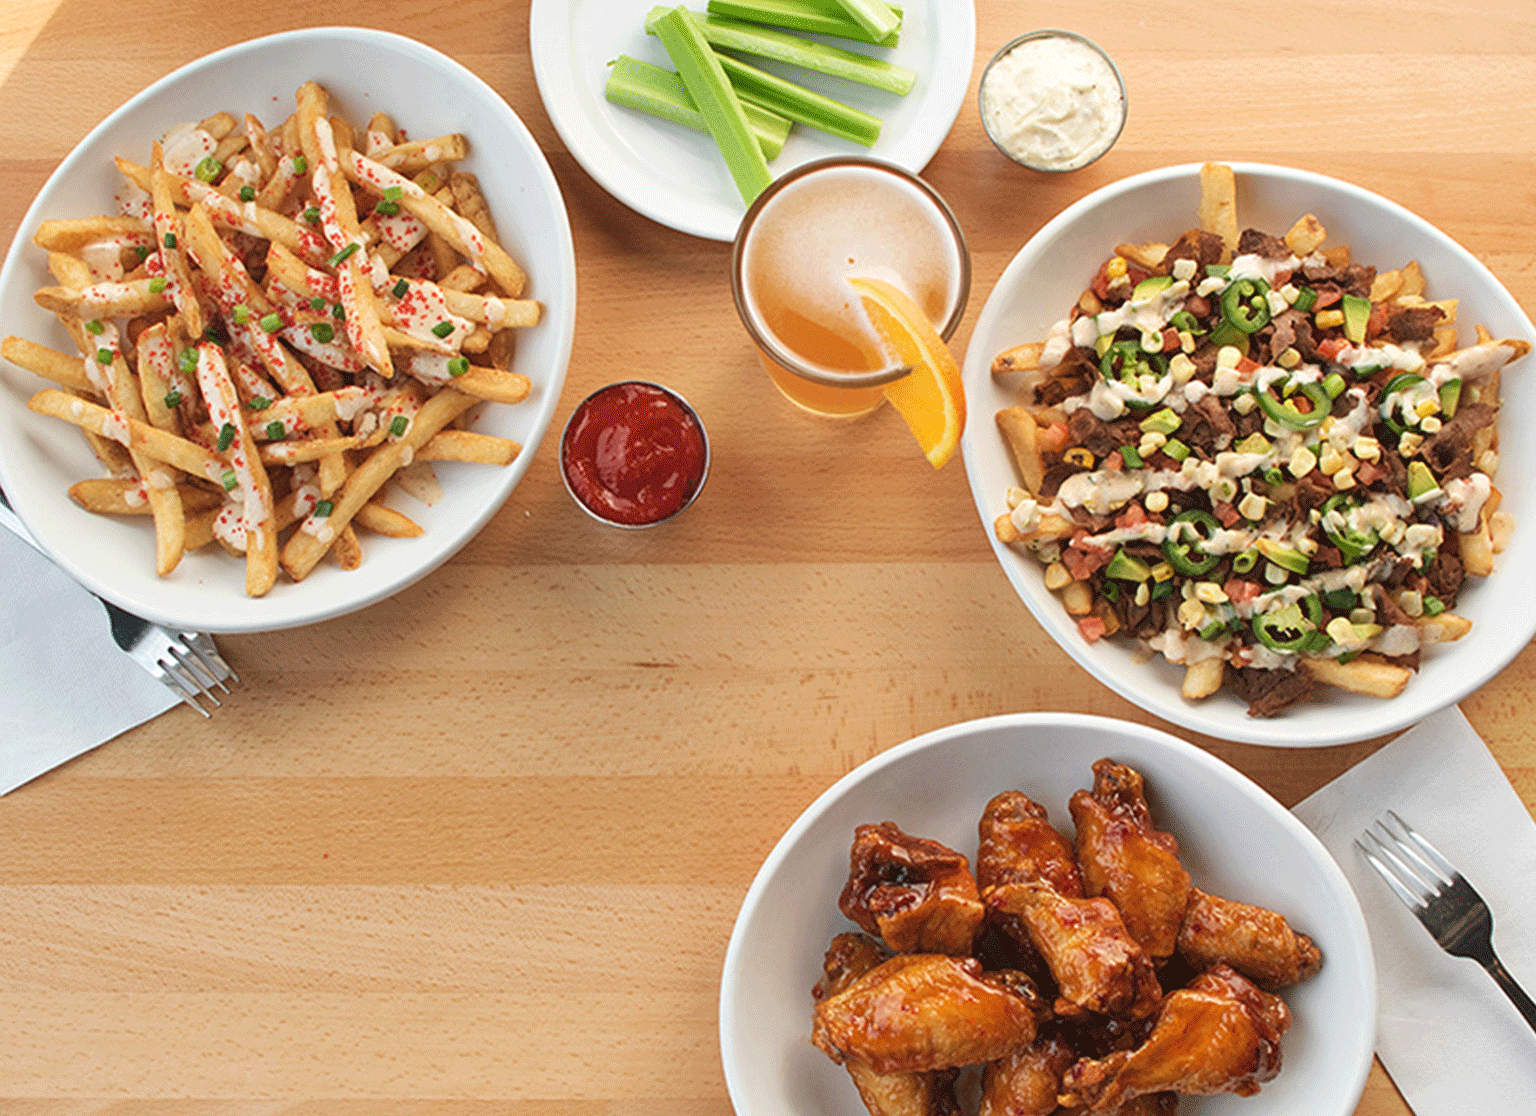 Wings and Rings Introduces New Crave-Worthy Loaded Fries for Spring